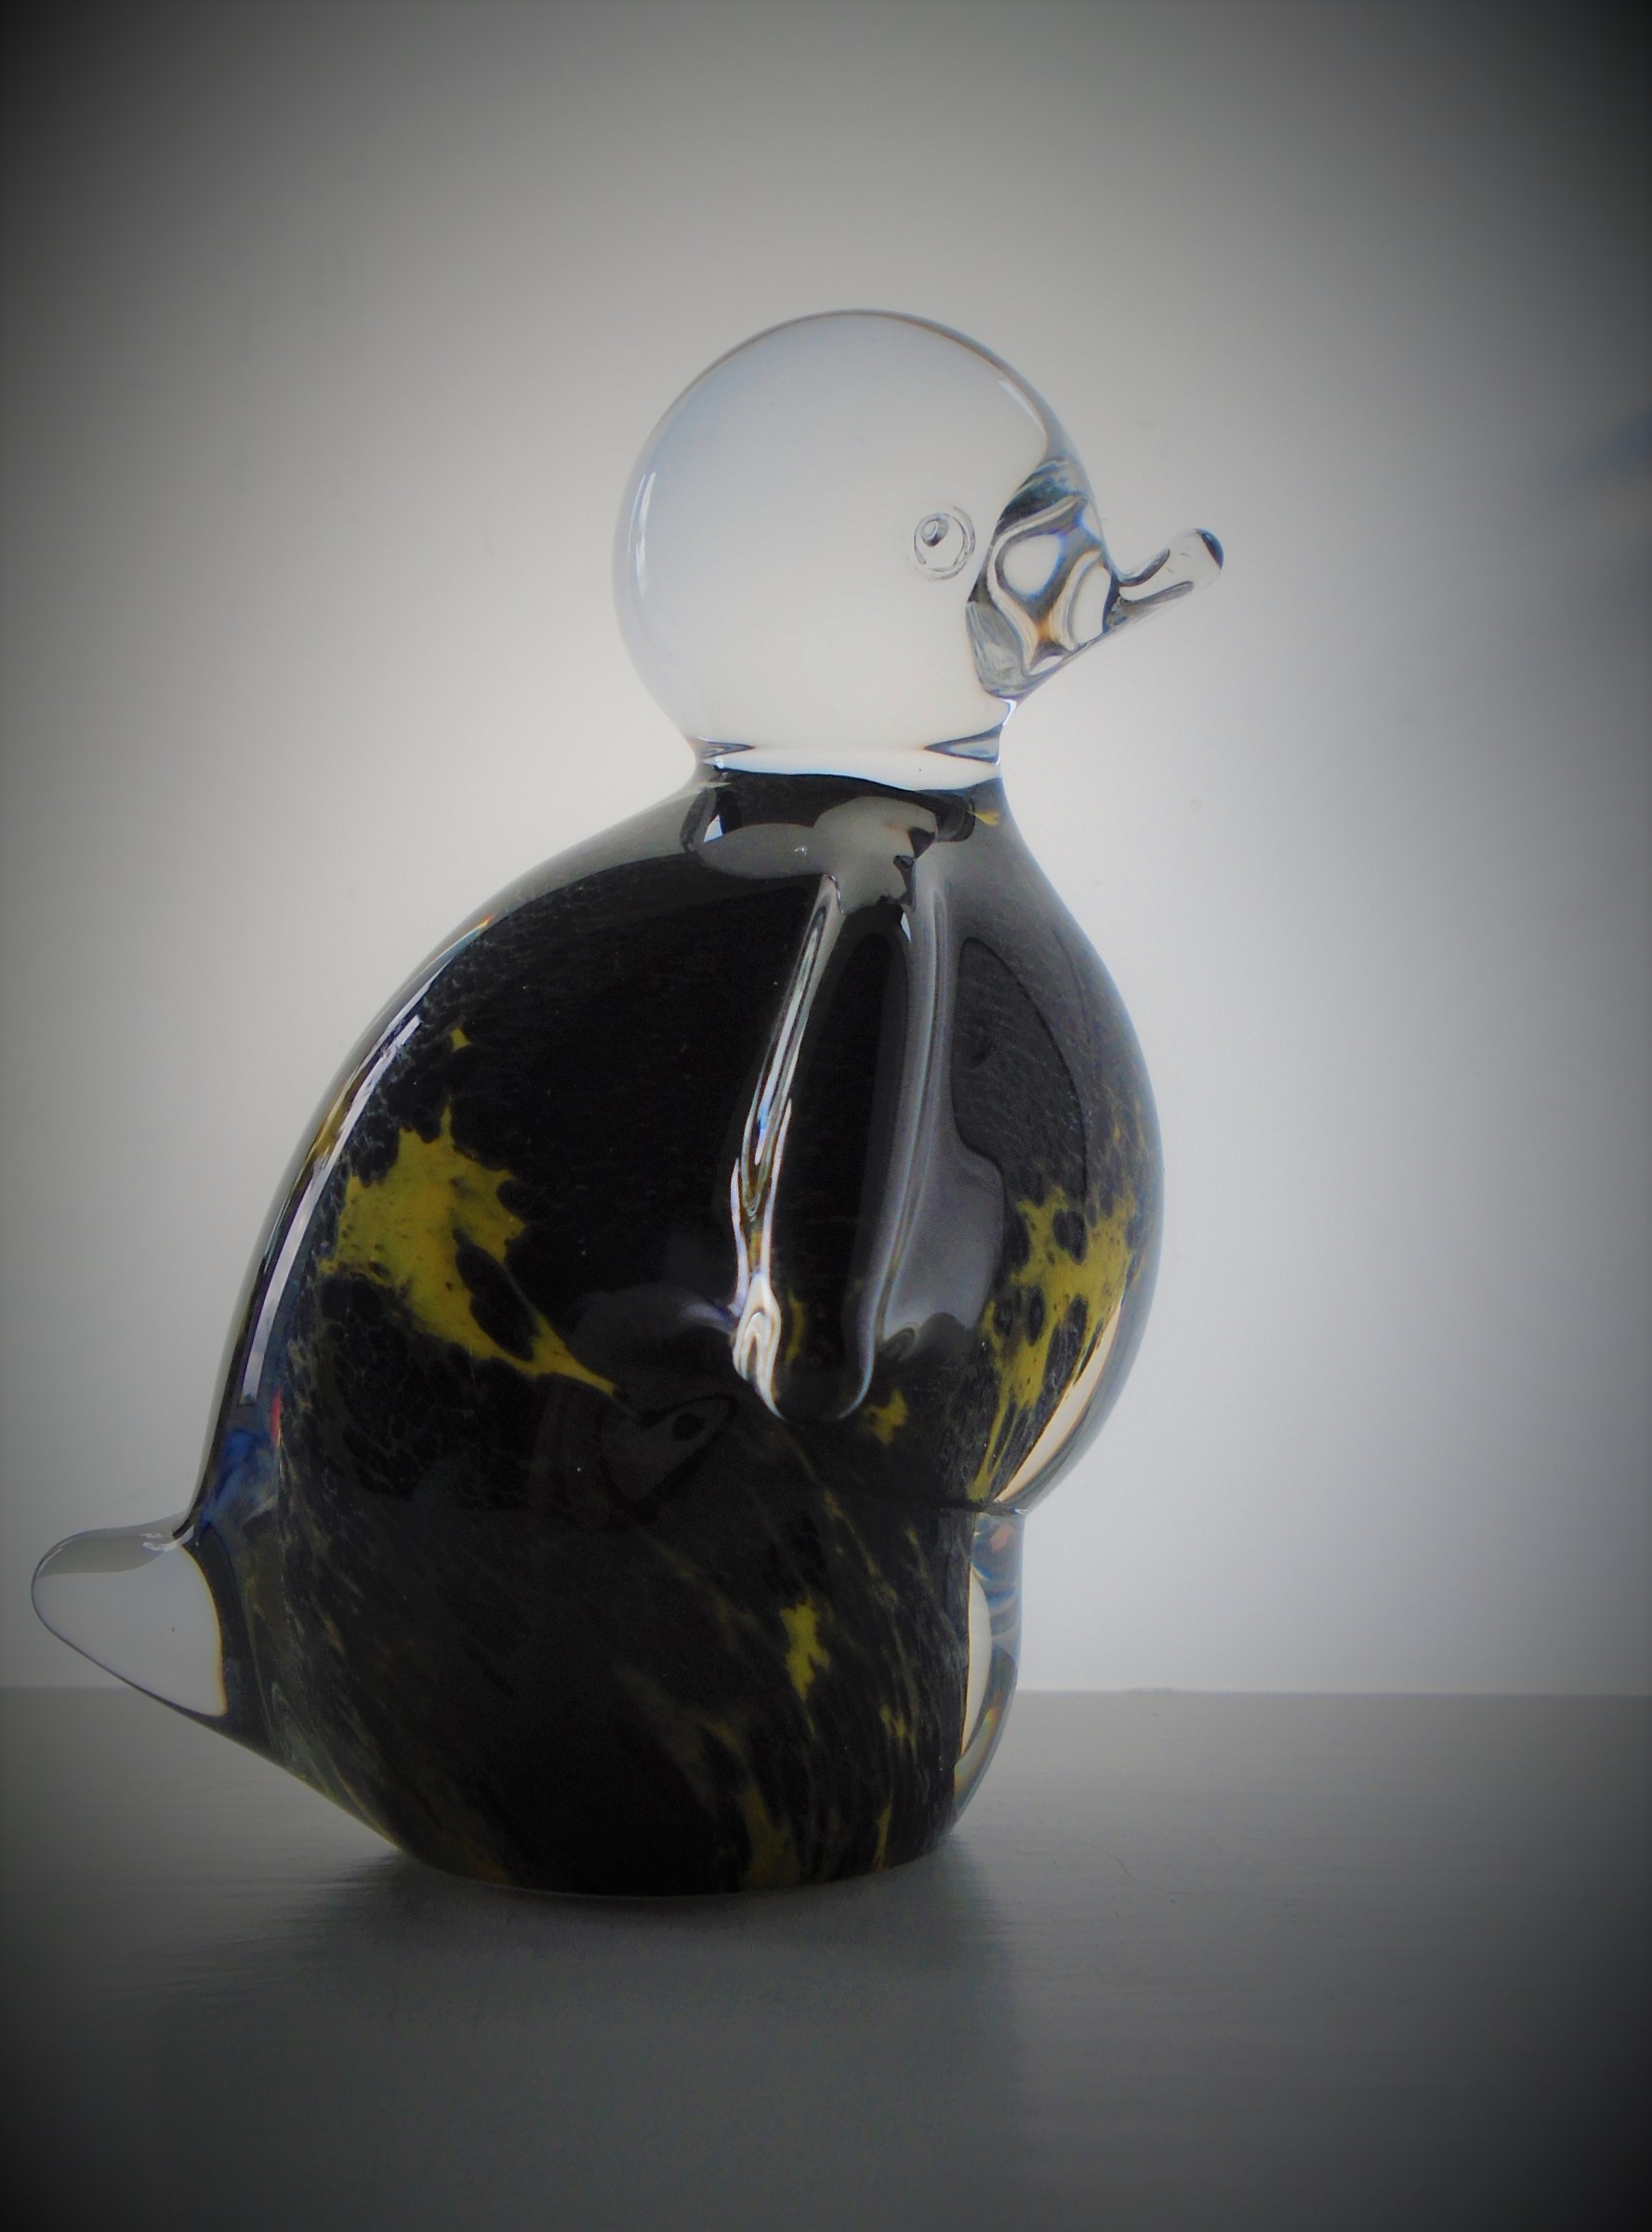 Less seen example of a VINTAGE GLASS BIRD FIGURE/PAPERWEIGHT FROM SWEDISH MAKER FM  KONSTGLAS RONNERBY. 